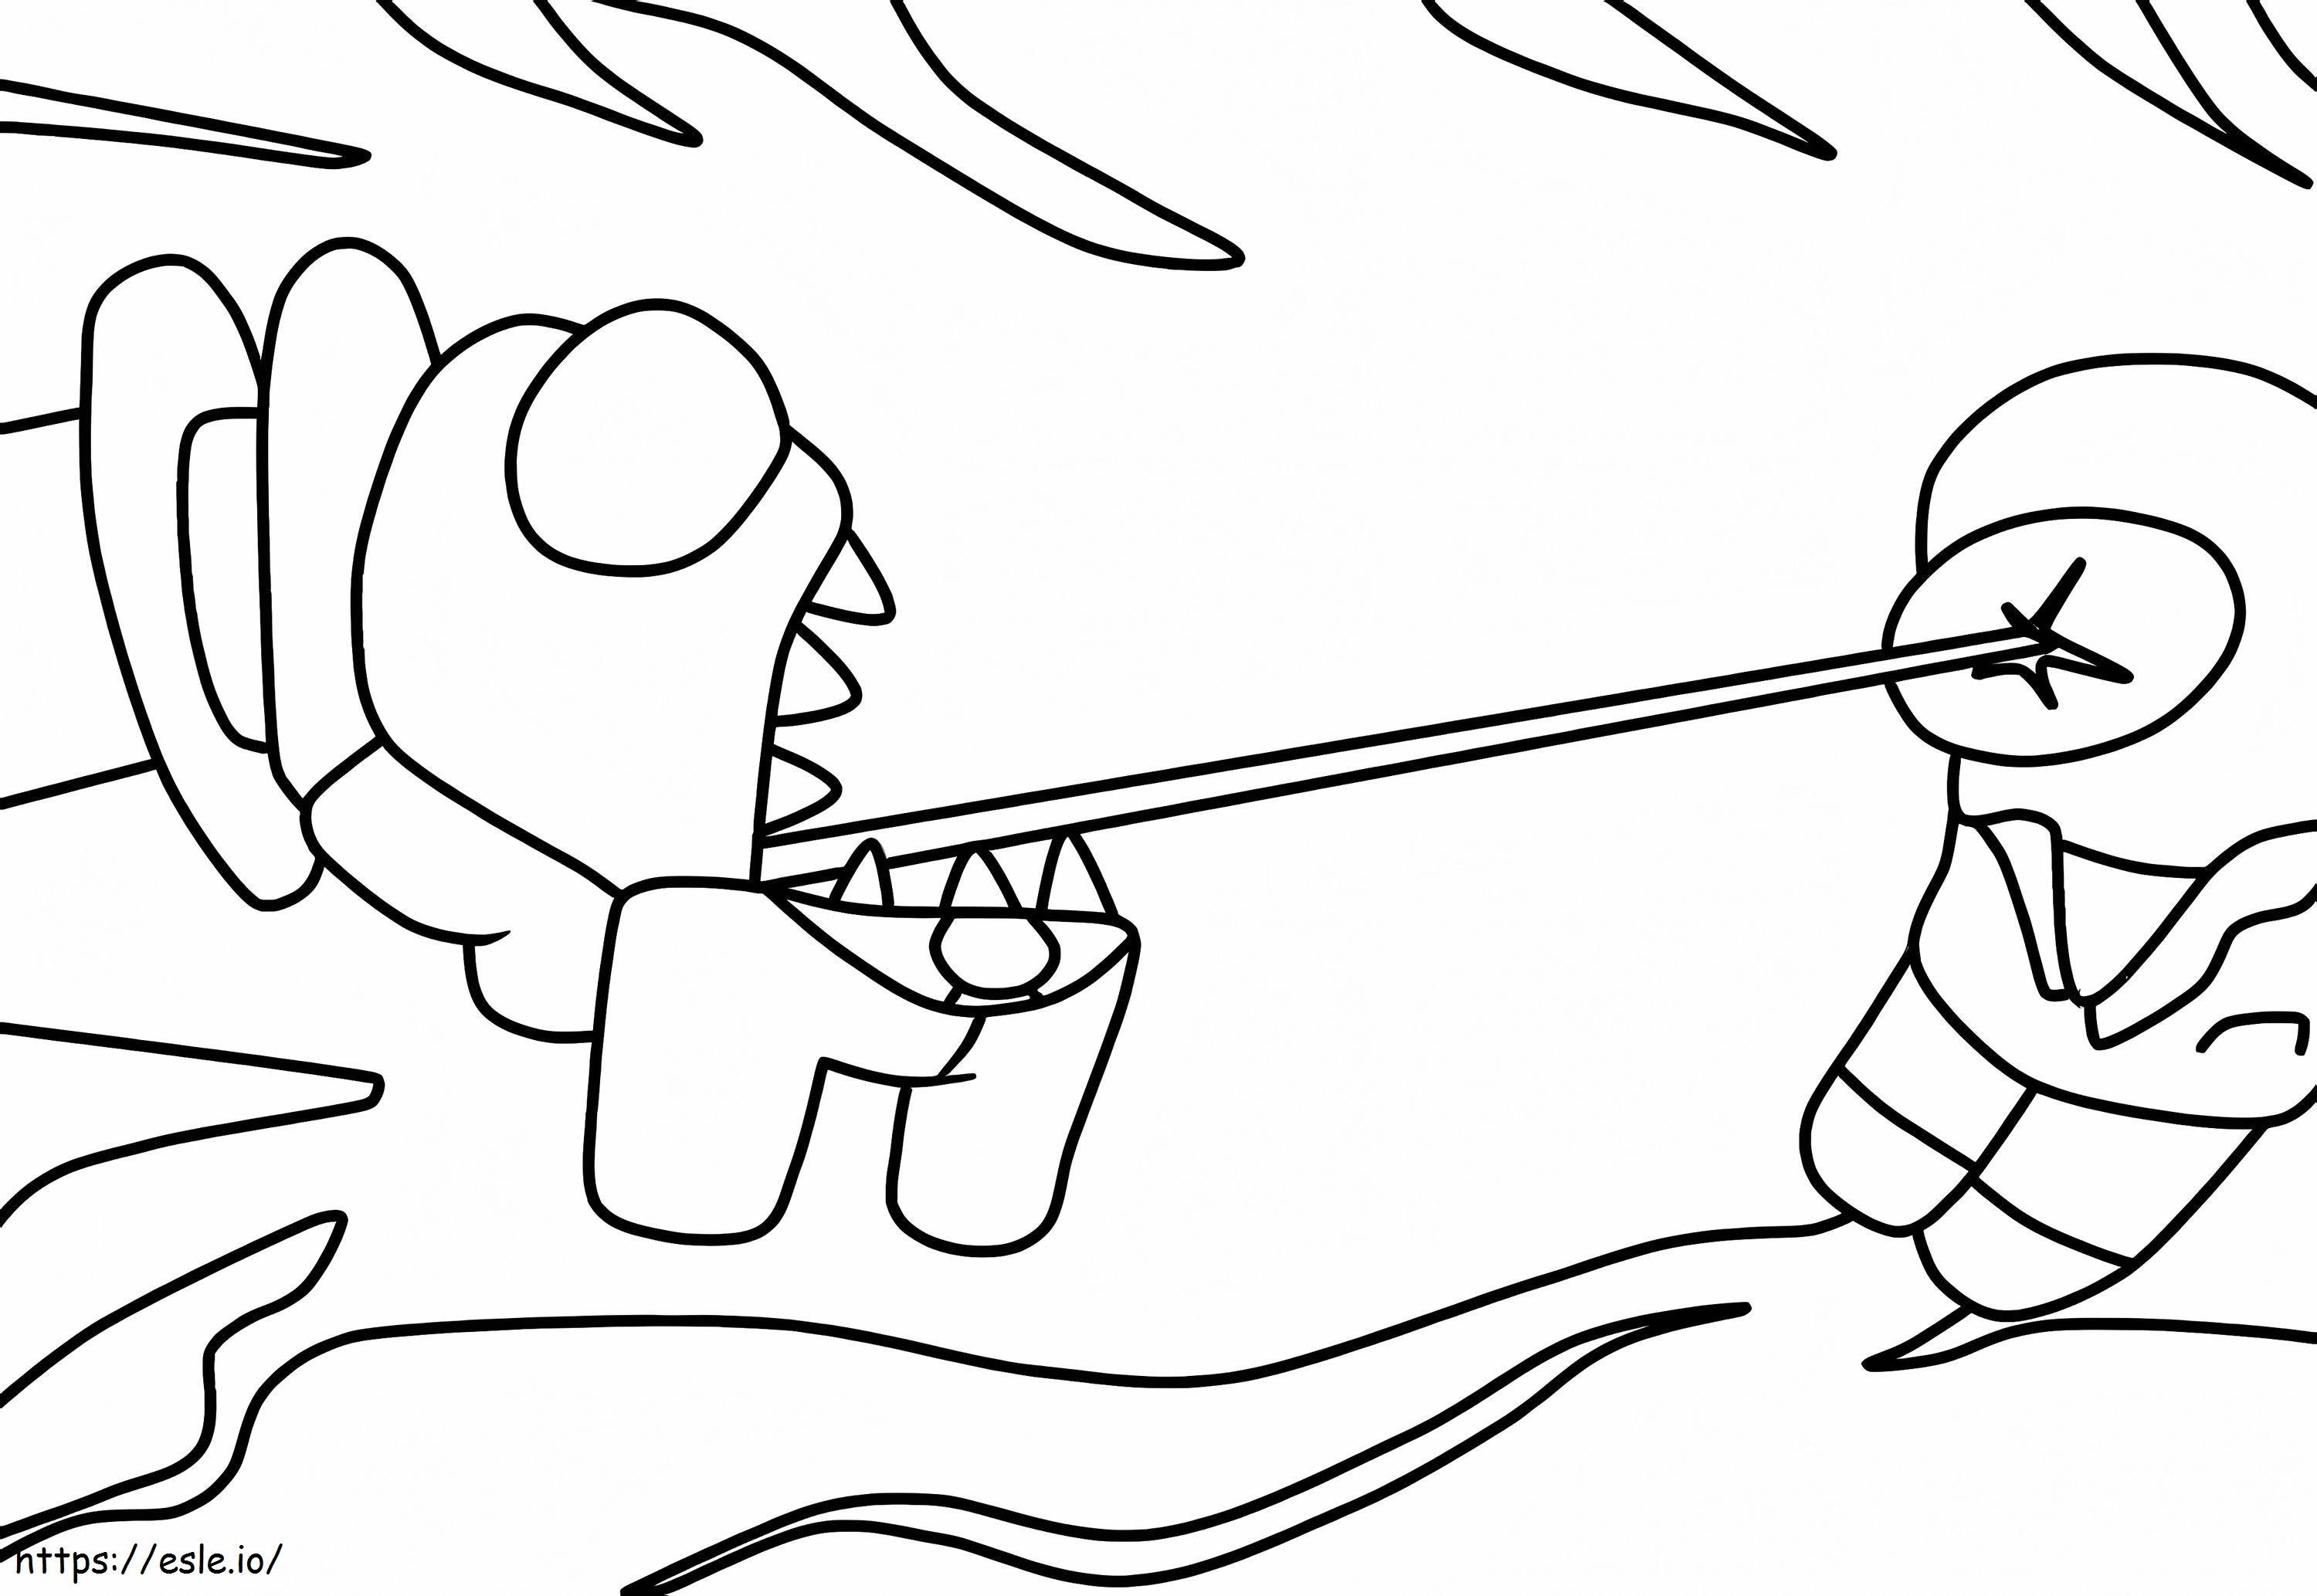 Cosmonaut Attacks The Traitor coloring page